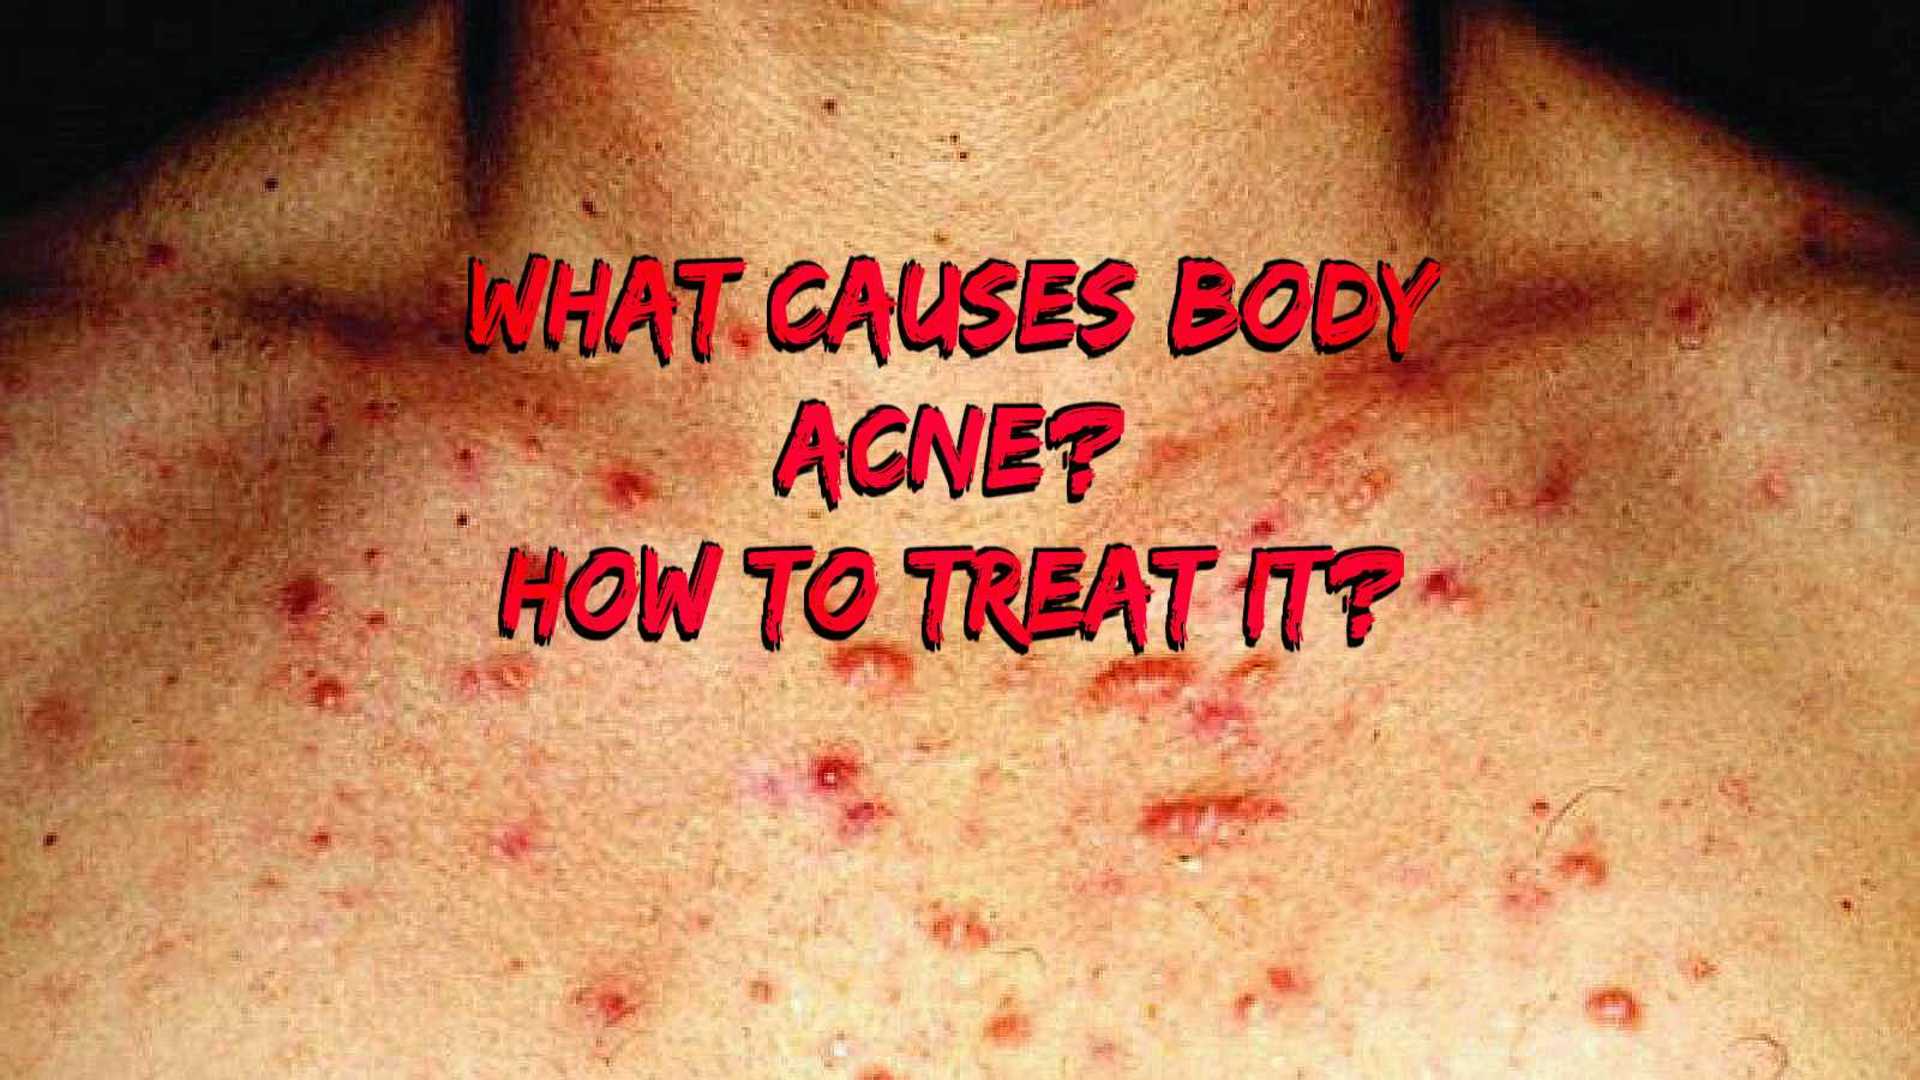 What Causes Body Acne and How to Treat It? image